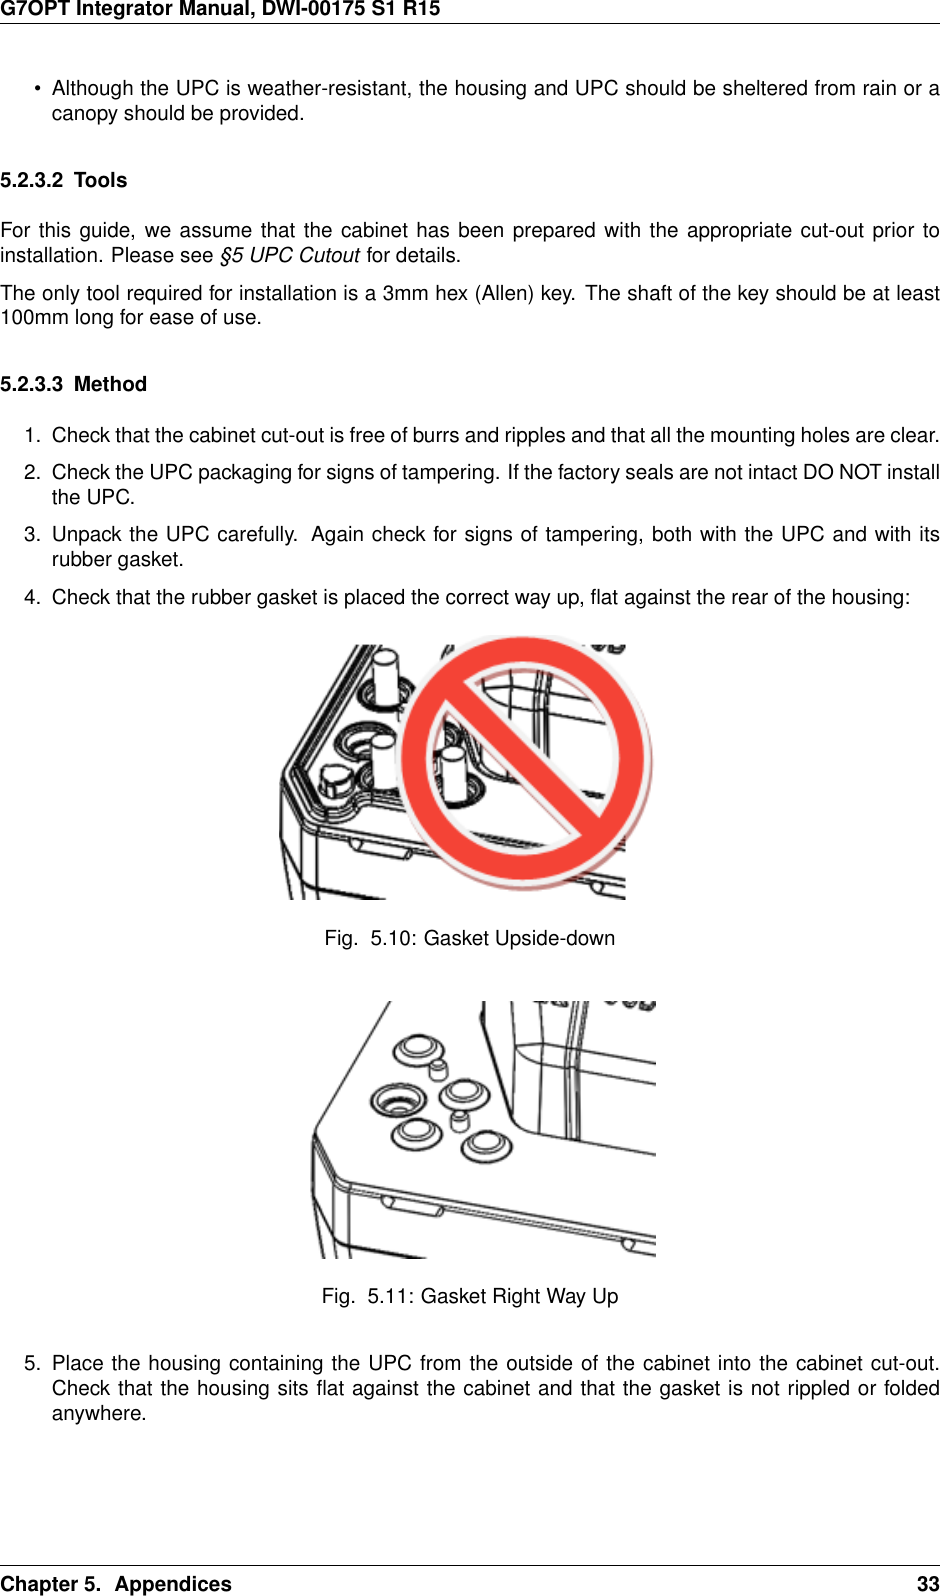 G7OPT Integrator Manual, DWI-00175 S1 R15• Although the UPC is weather-resistant, the housing and UPC should be sheltered from rain or acanopy should be provided.5.2.3.2 ToolsFor this guide, we assume that the cabinet has been prepared with the appropriate cut-out prior toinstallation. Please see §5 UPC Cutout for details.The only tool required for installation is a 3mm hex (Allen) key. The shaft of the key should be at least100mm long for ease of use.5.2.3.3 Method1. Check that the cabinet cut-out is free of burrs and ripples and that all the mounting holes are clear.2. Check the UPC packaging for signs of tampering. If the factory seals are not intact DO NOT installthe UPC.3. Unpack the UPC carefully. Again check for signs of tampering, both with the UPC and with itsrubber gasket.4. Check that the rubber gasket is placed the correct way up, ﬂat against the rear of the housing:Fig. 5.10: Gasket Upside-downFig. 5.11: Gasket Right Way Up5. Place the housing containing the UPC from the outside of the cabinet into the cabinet cut-out.Check that the housing sits ﬂat against the cabinet and that the gasket is not rippled or foldedanywhere.Chapter 5. Appendices 33